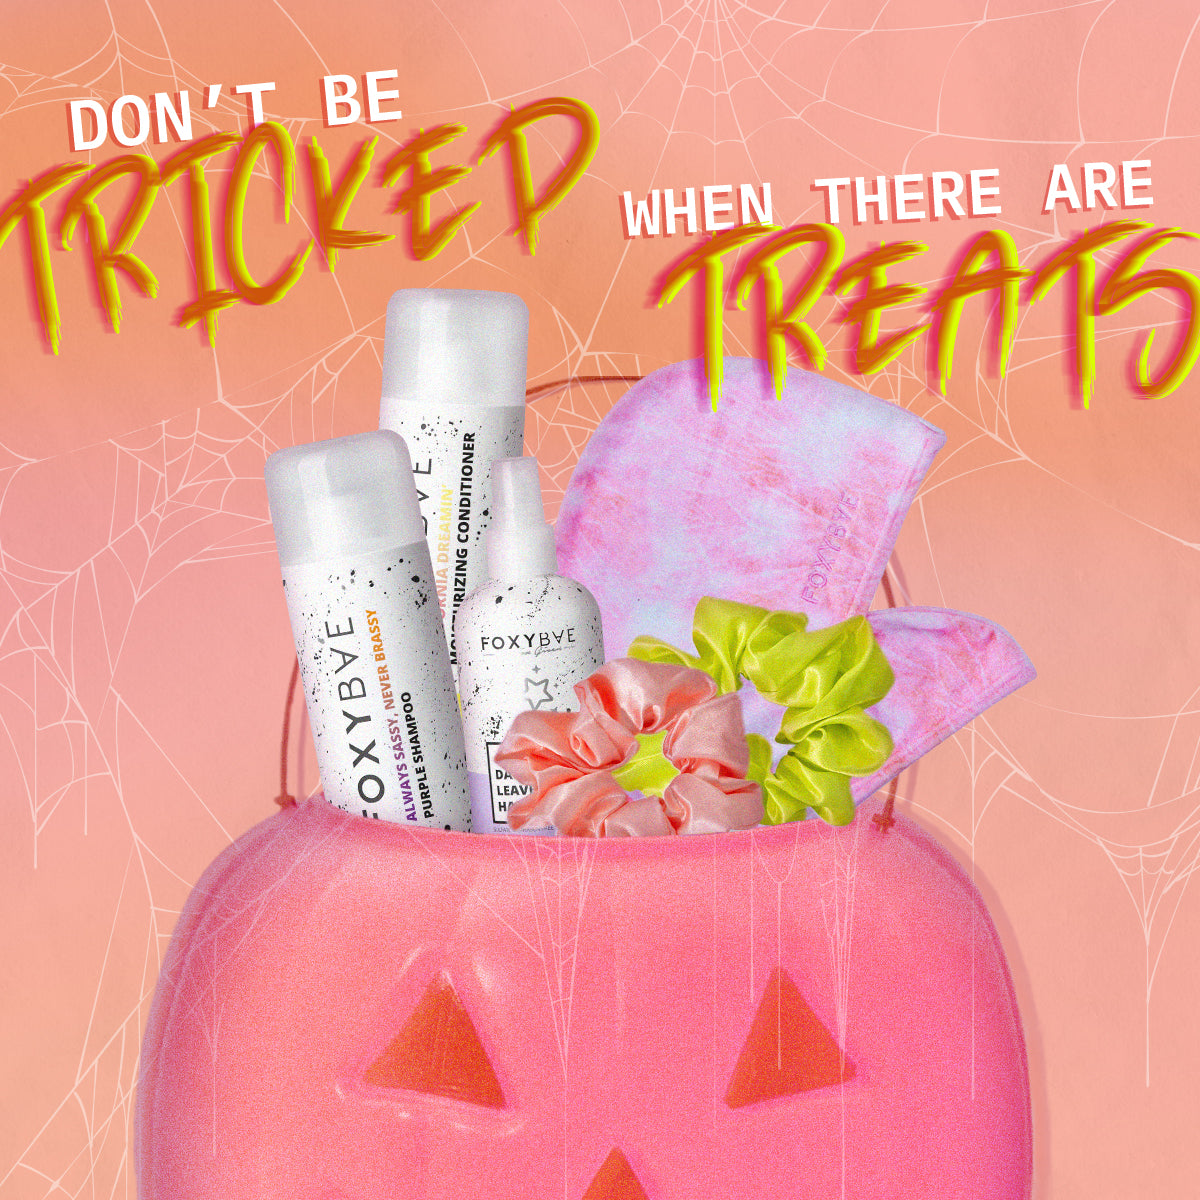 Don't Get Tricked When There Are Treats! featured image